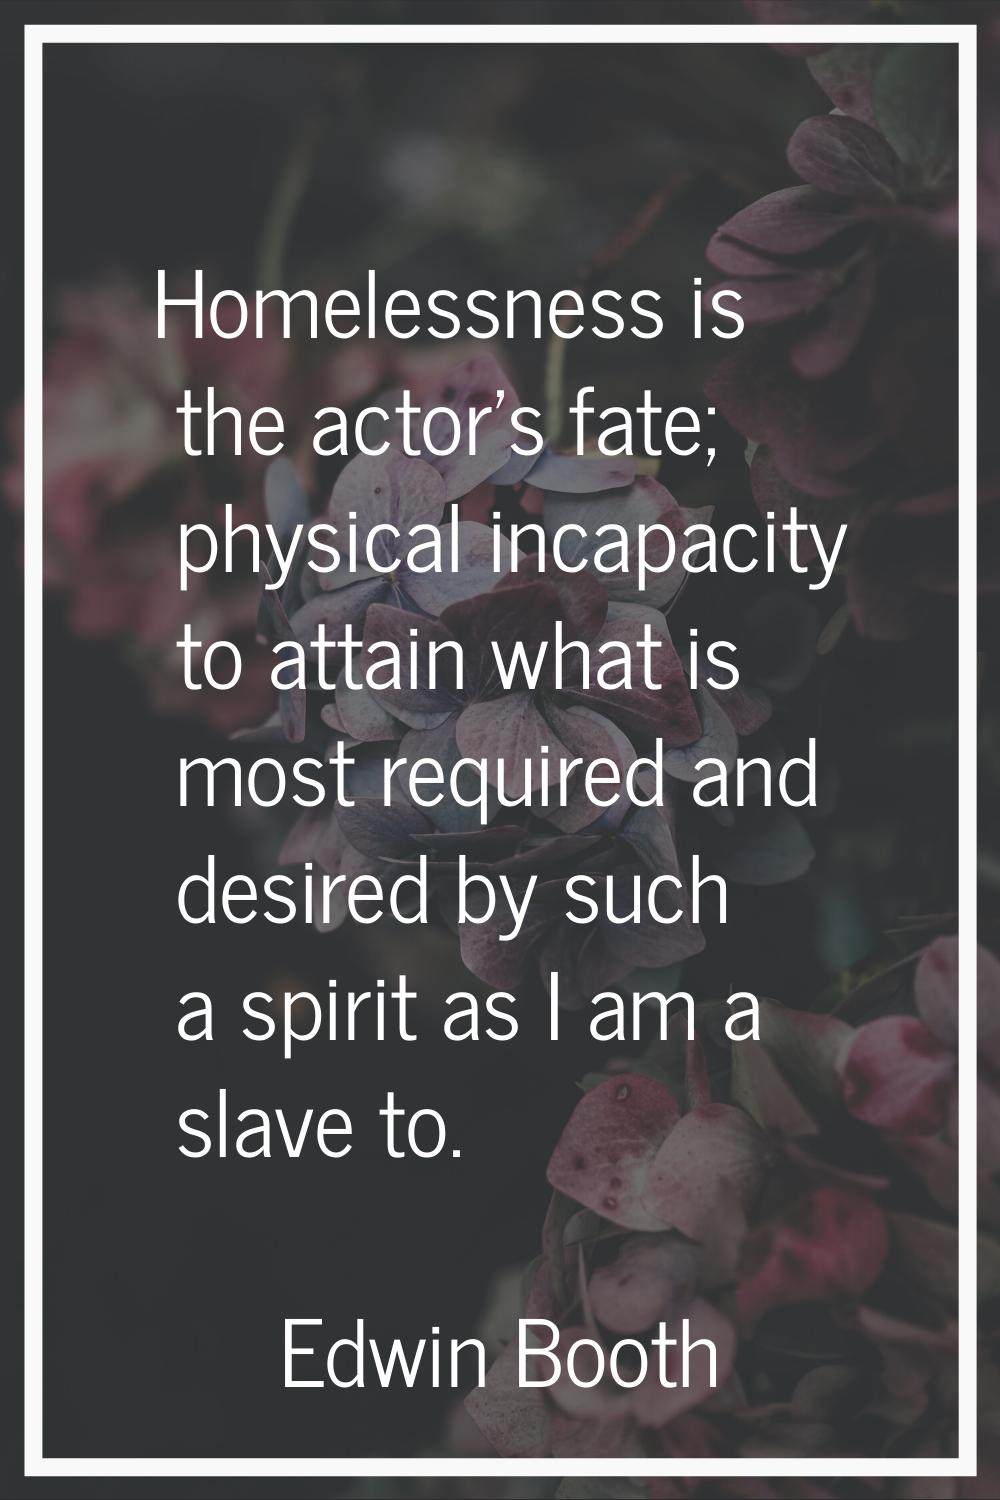 Homelessness is the actor's fate; physical incapacity to attain what is most required and desired b